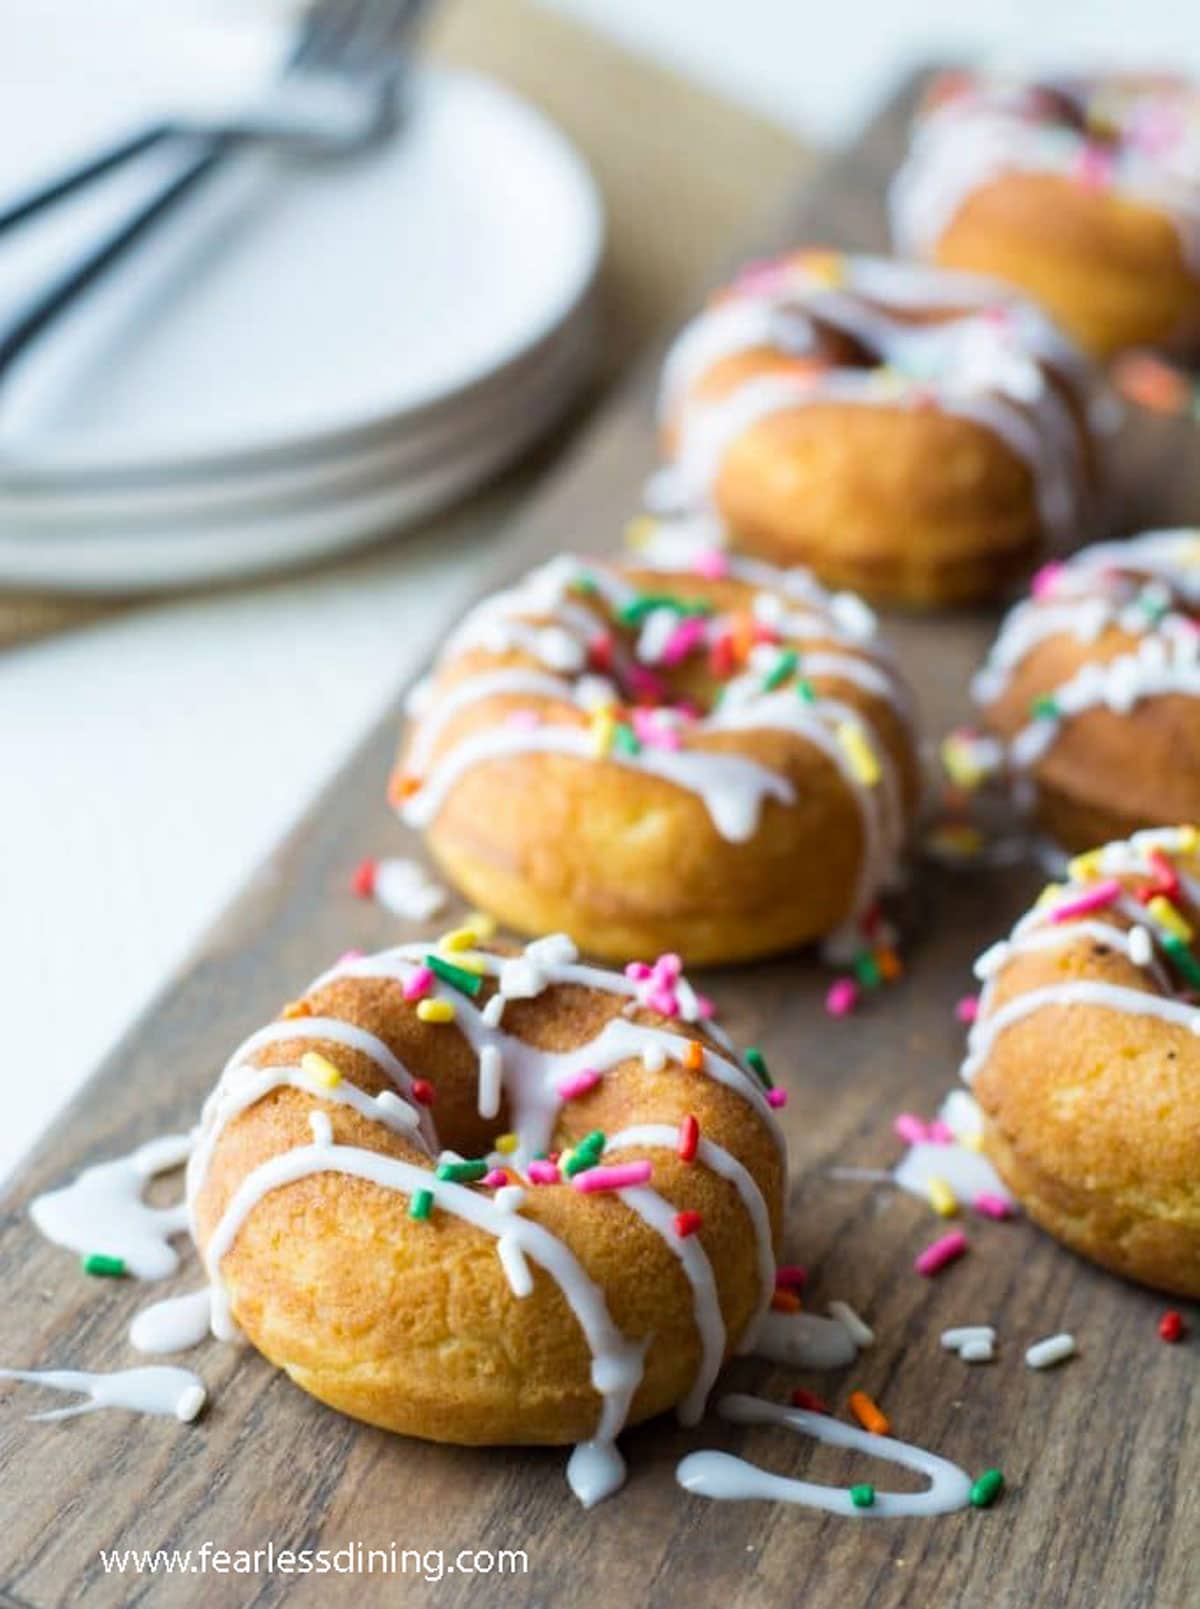 The vanilla donuts with icing and rainbow sprinkles on a cutting board.